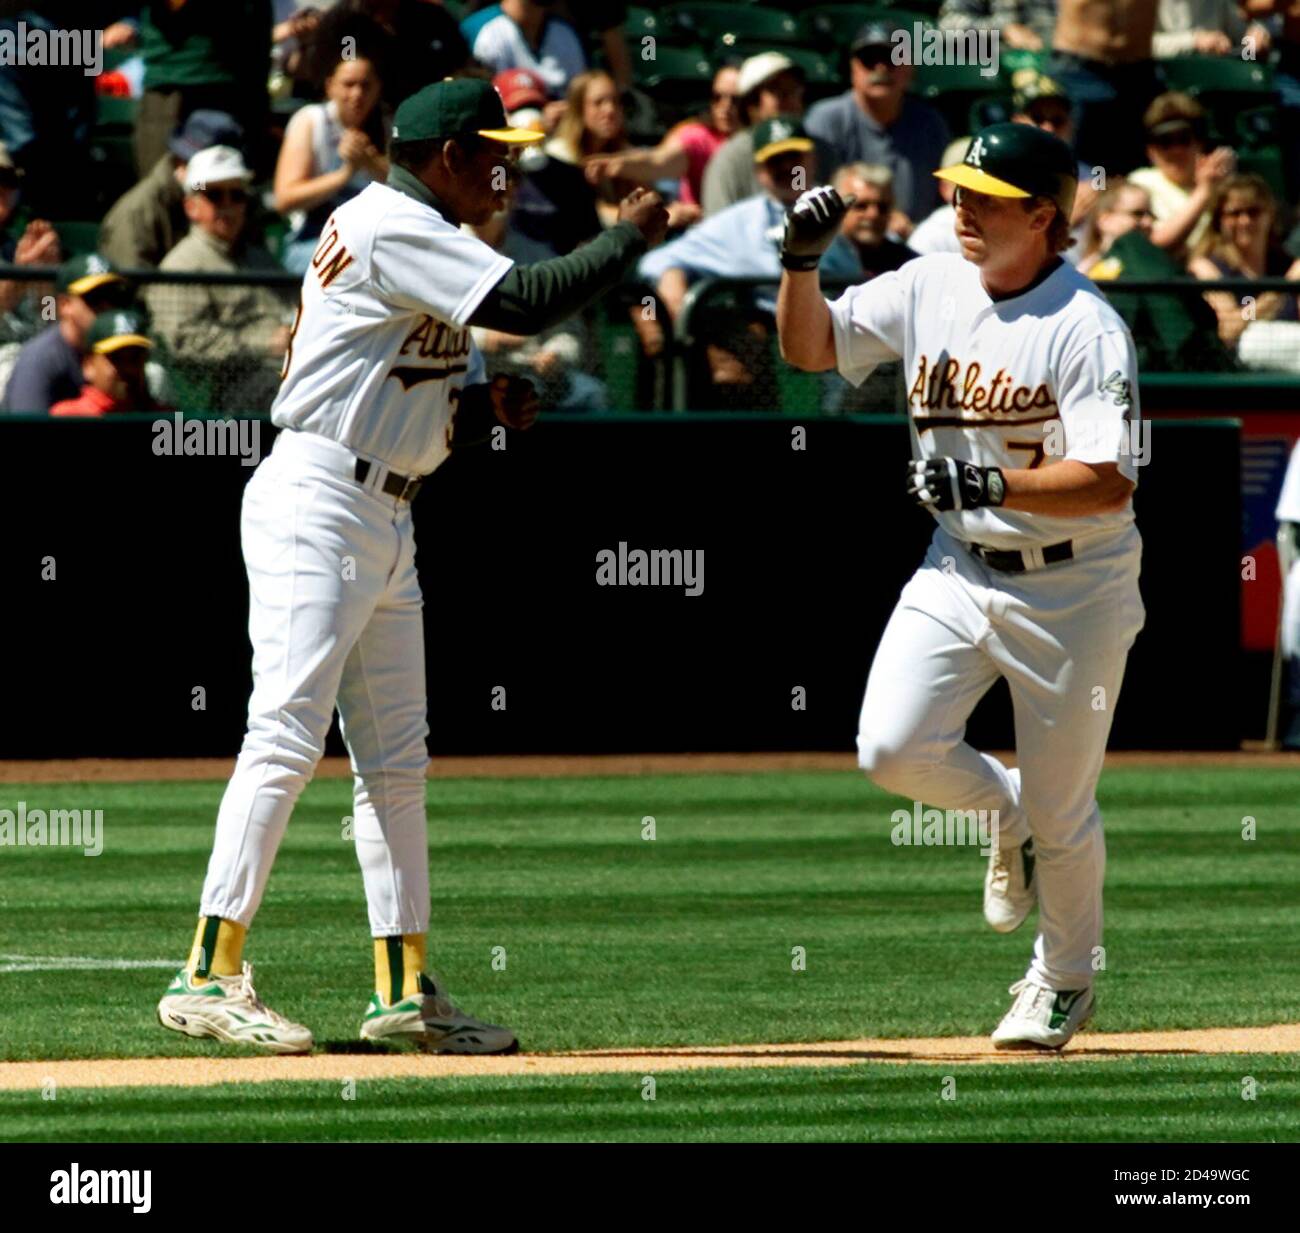 Oakland A S Jeremy Giambi 7 Is Congratulated By A S Third Base Coach Ron Washington After Hitting A Solo Home Run Off Anaheim Angels Starting Pitcher Ramon Ortiz In The Sixth Inning Of